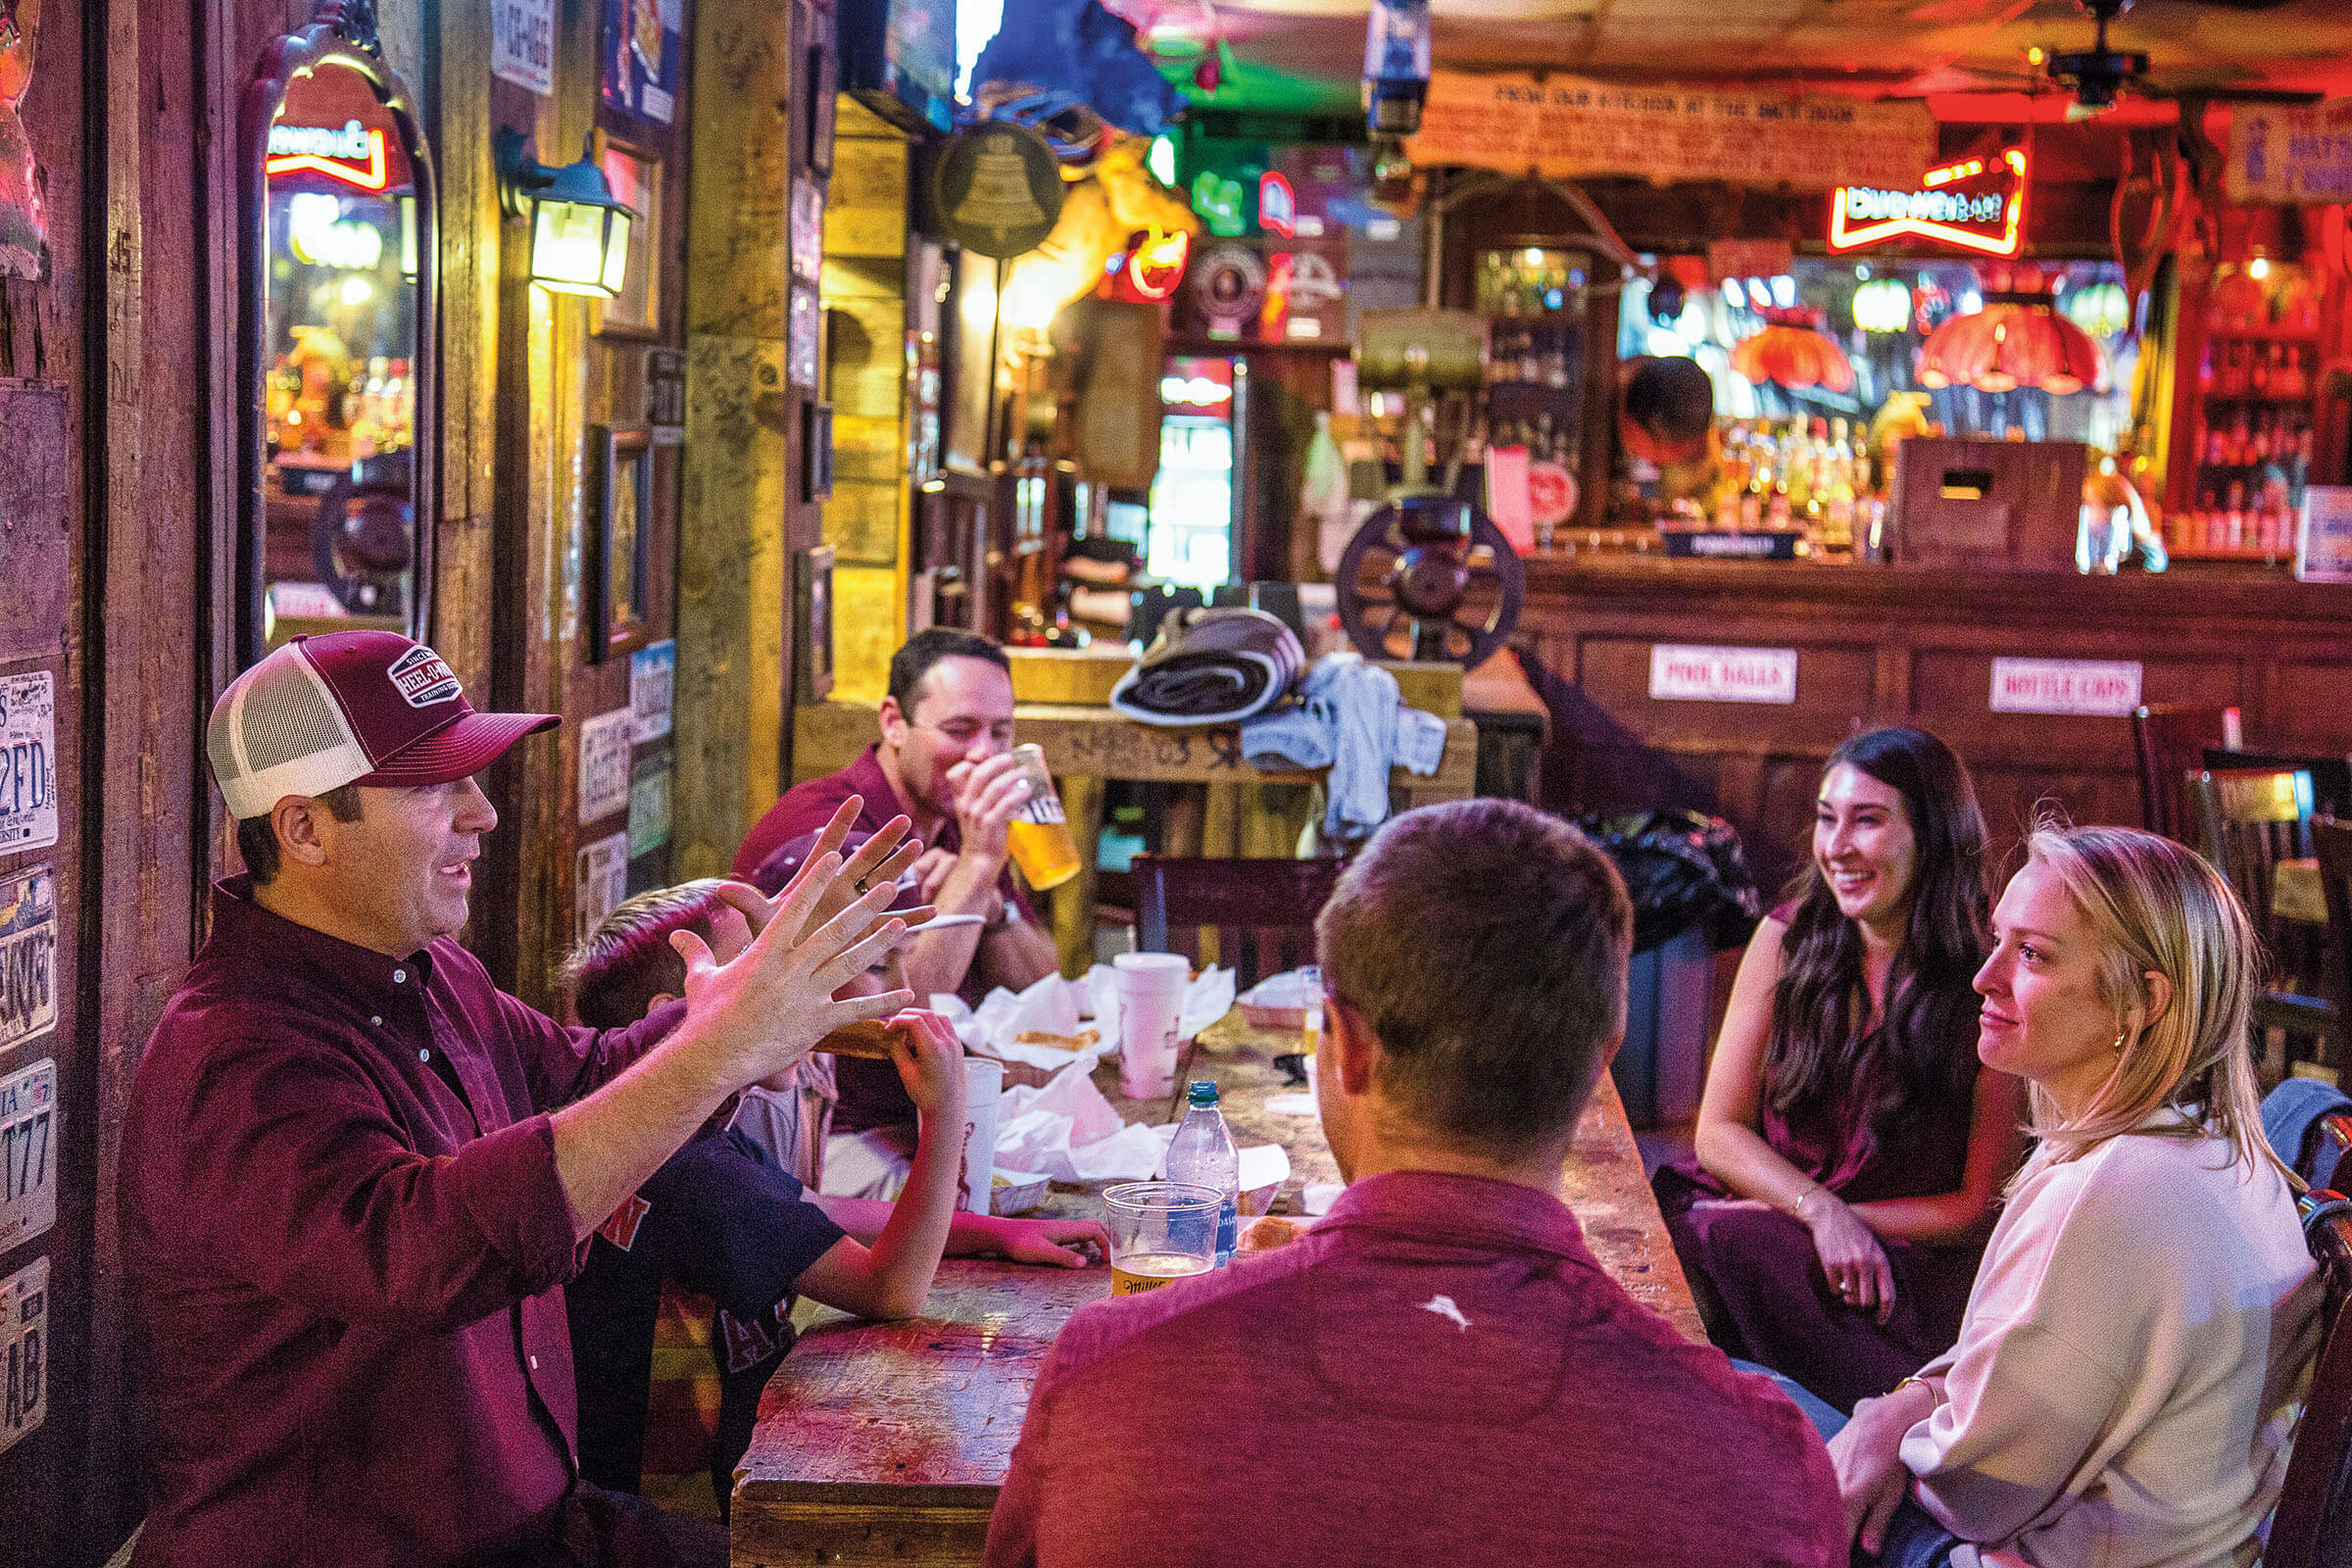 A group of people wearing Aggie attire talk at a bar